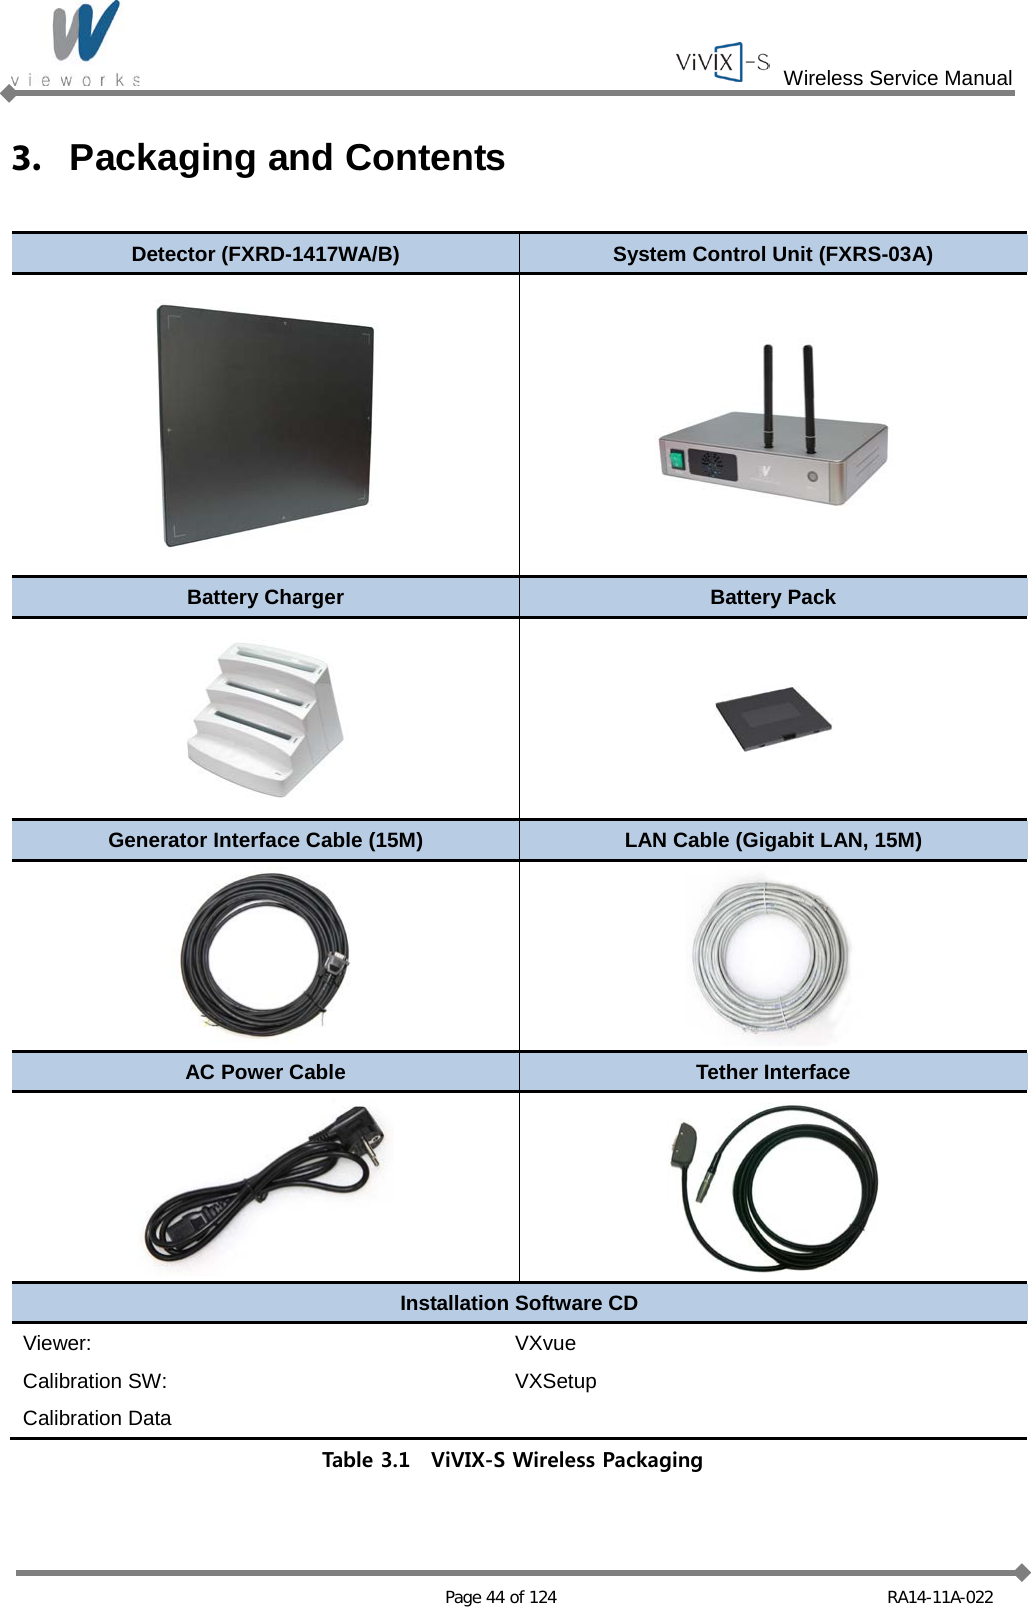  Wireless Service Manual   Page 44 of 124 RA14-11A-022 3. Packaging and Contents  Detector (FXRD-1417WA/B) System Control Unit (FXRS-03A)   Battery Charger Battery Pack   Generator Interface Cable (15M) LAN Cable (Gigabit LAN, 15M)   AC Power Cable Tether Interface   Installation Software CD Viewer:    VXvue Calibration SW: VXSetup Calibration Data Table 3.1  ViVIX-S Wireless Packaging 